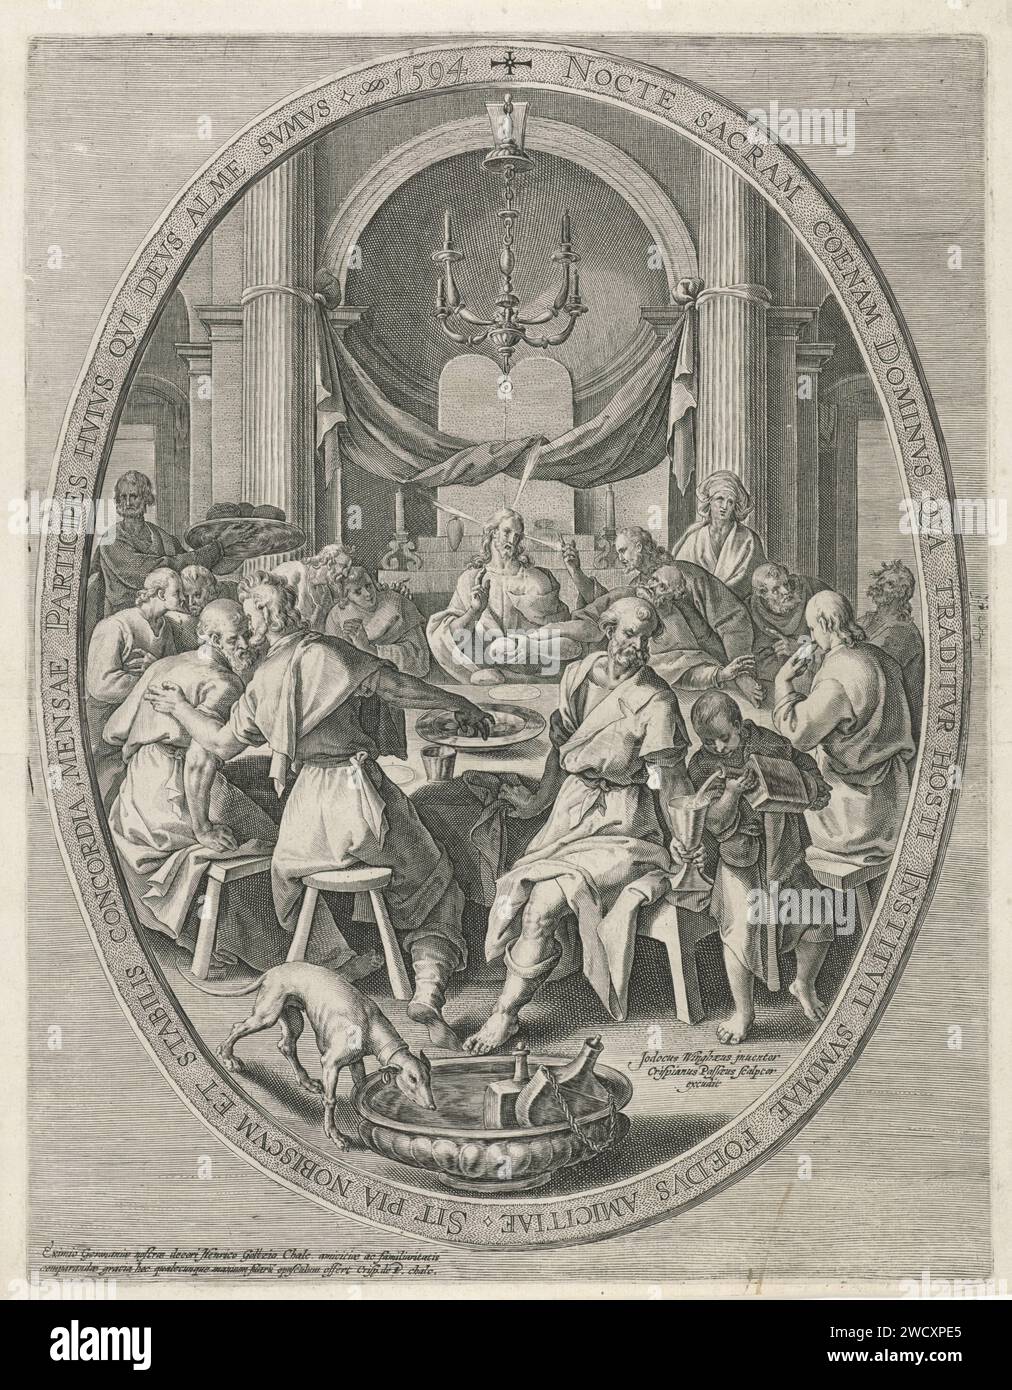 Last Supper, Crispijn van de Passe (I), After Joos van Winghe, 1594 print Christ and his students sit around a table. Christ holds the bread and makes a blessing gesture. In the background on an altar are the tables of the law. The show is caught in an oval frame with an edge writing in Latin. Cologne paper engraving Last Supper (in general) (Matthew 26:21-35; Mark 14:18-31; Luke 22:3, 22:15-23; John 13:21-38). institution of the Eucharist, i.e. Christ showing or blessing bread (host) and/or wine (Matthew 26:26-27; Mark 14:22-23; Luke 22:19-20; John 13:26; 1 Corinthians 11:23-25) Stock Photo